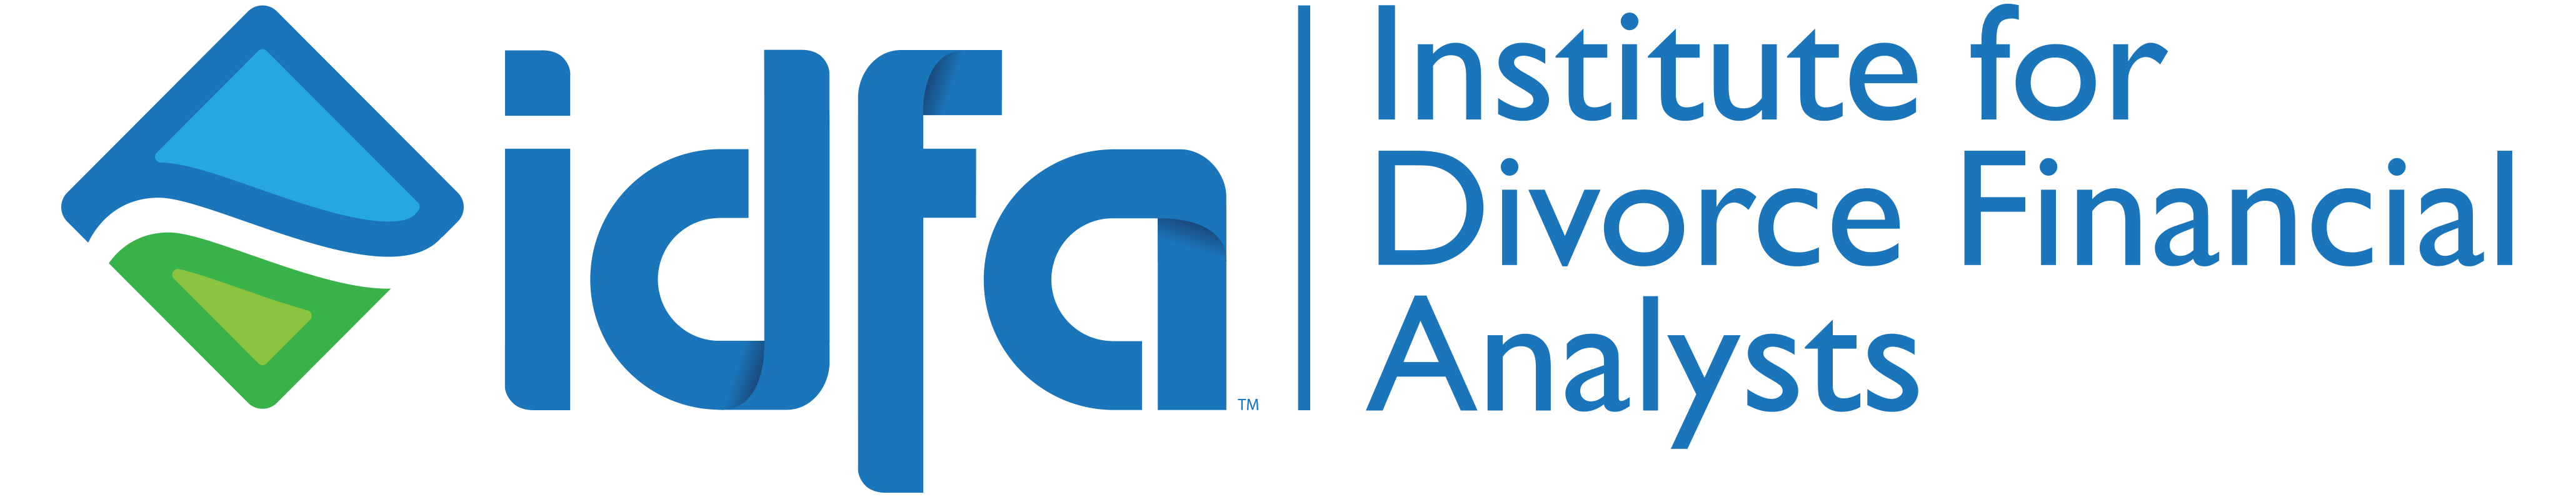 Institute for Divorce Financial Analysts